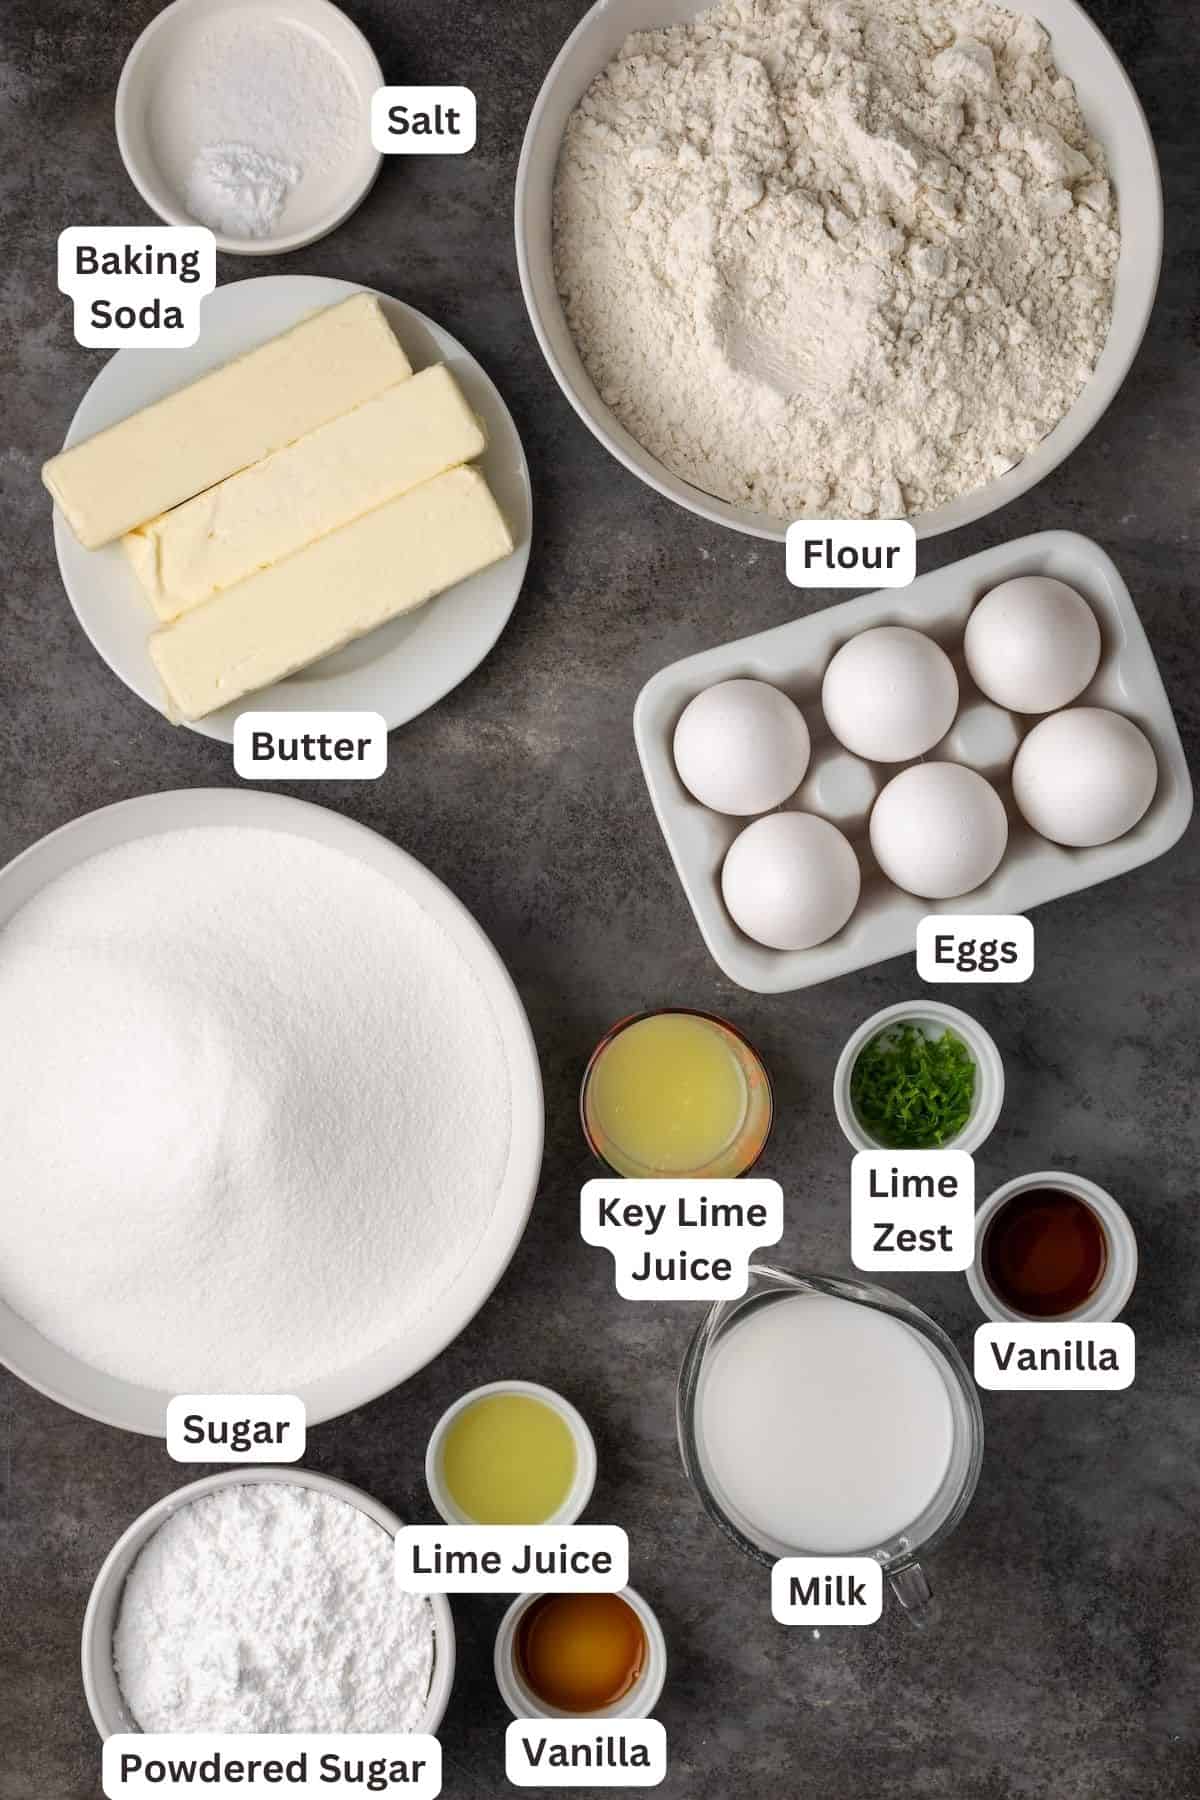 Ingredients for Key Lime Pound Cake.